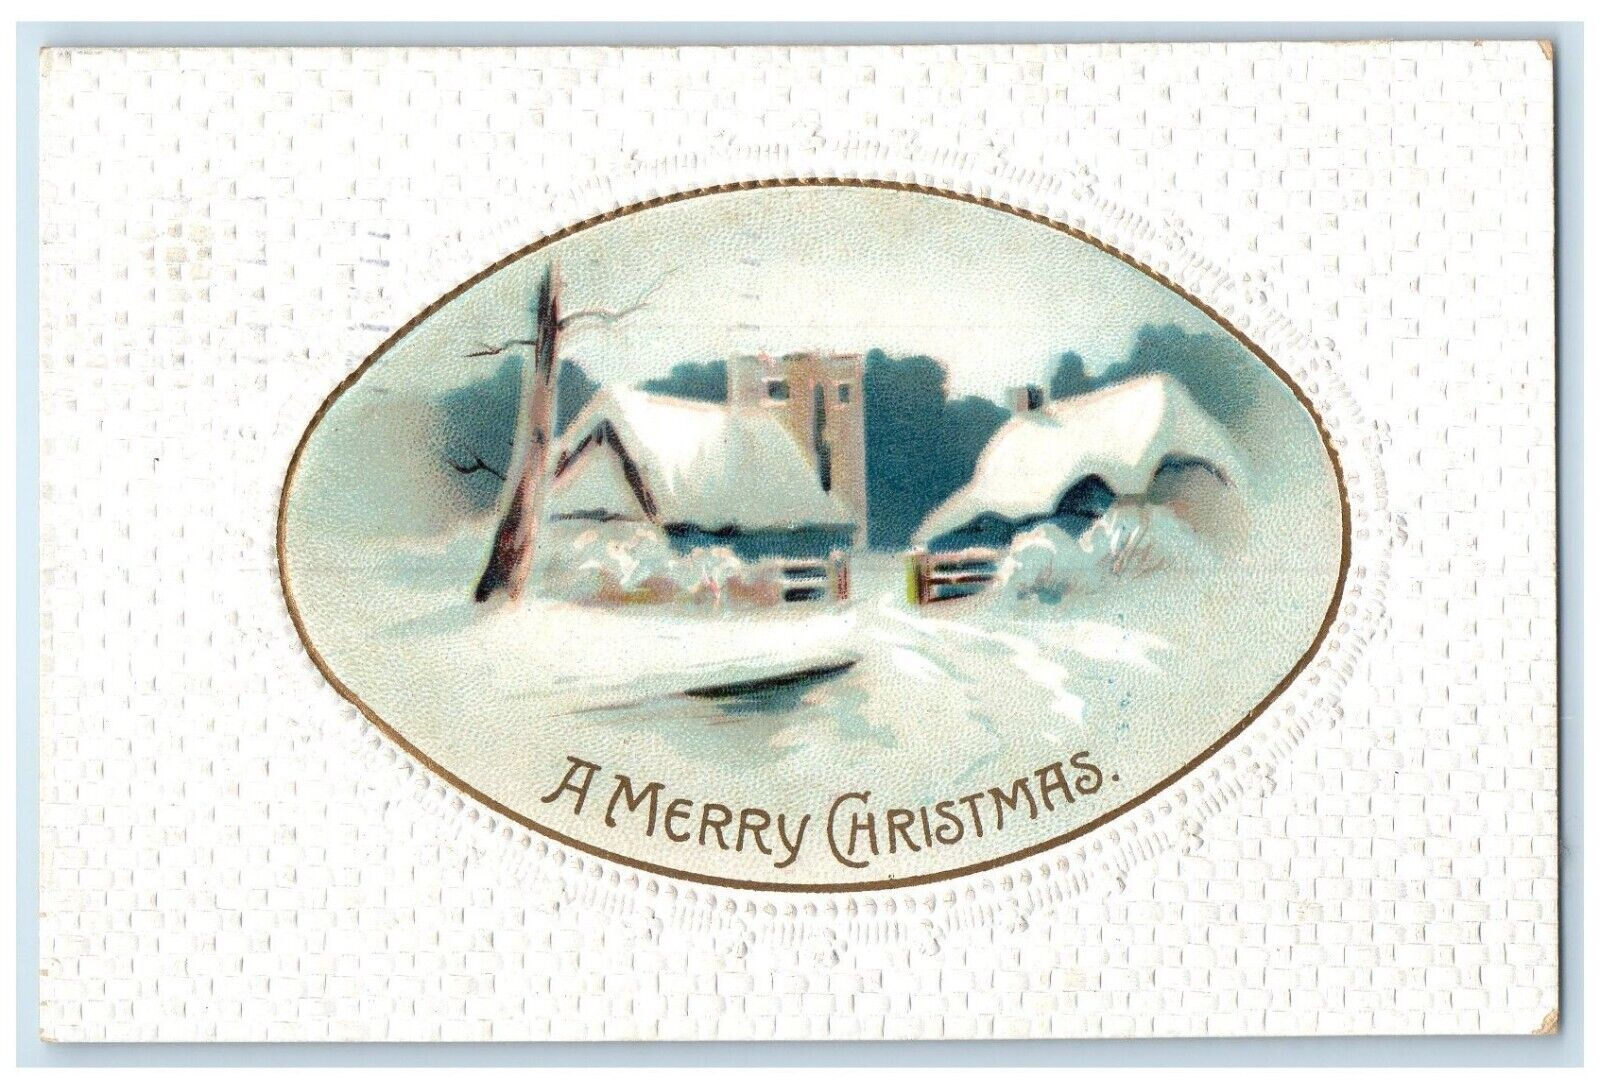 1912 Merry Christmas Houses On Winter Clapsaddle Ithaca NY Antique Postcard